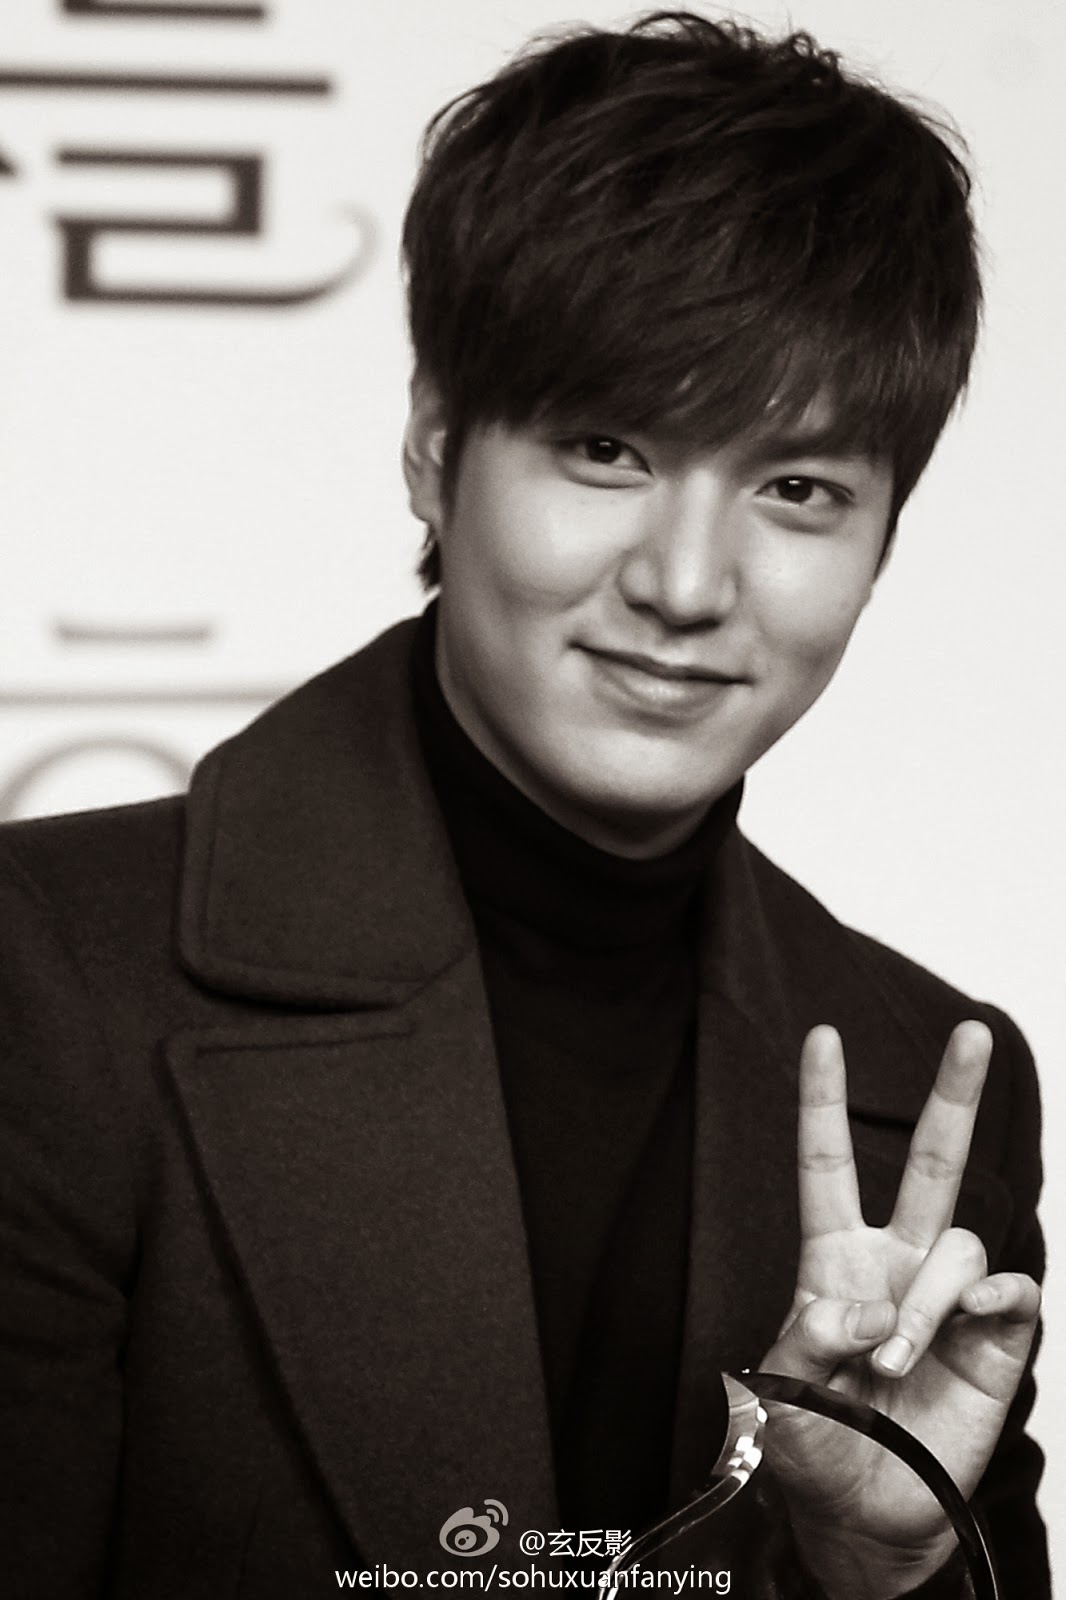 The Imaginary World of Monika: Lee Min Ho - Interview with Sohu - 21.12 ...